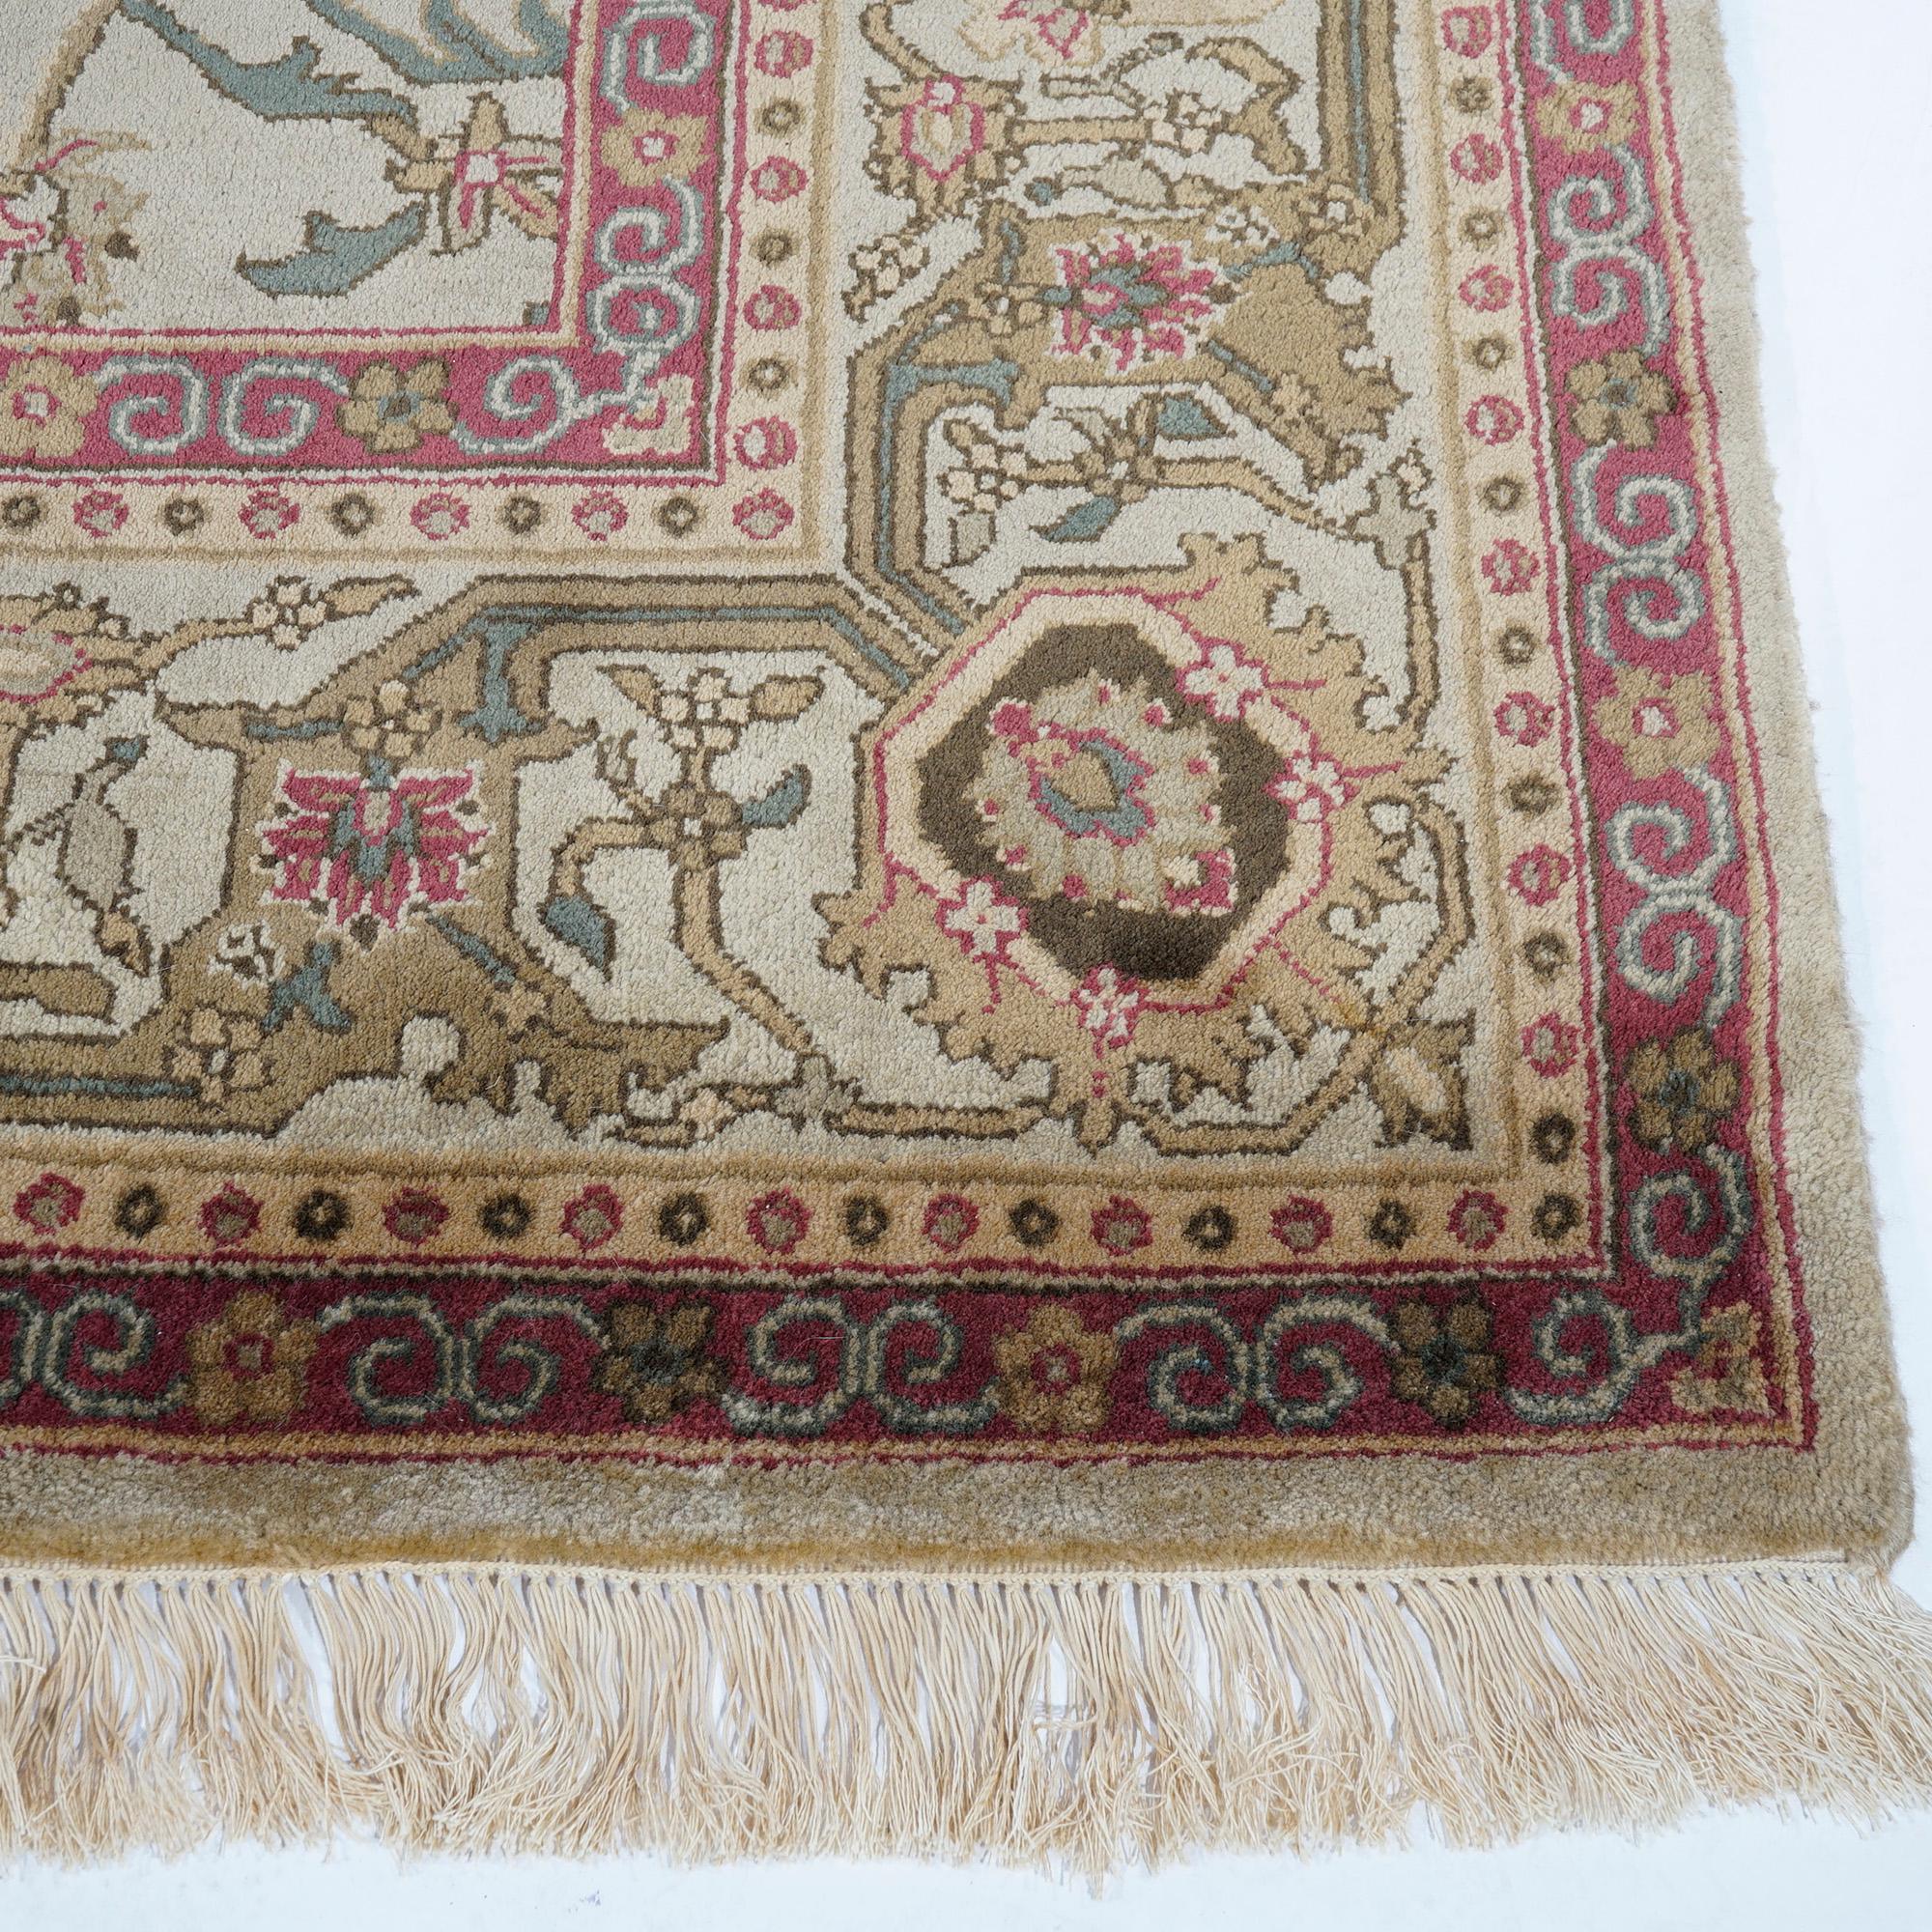 An Indo Agra carpet offers wool construction with repeating pattern of stylized floral vases as photographed, 20th century

Measures- 122'' L x 99.5'' W x .5'' D.

Catalogue Note: Ask about DISCOUNTED DELIVERY RATES available to most regions within